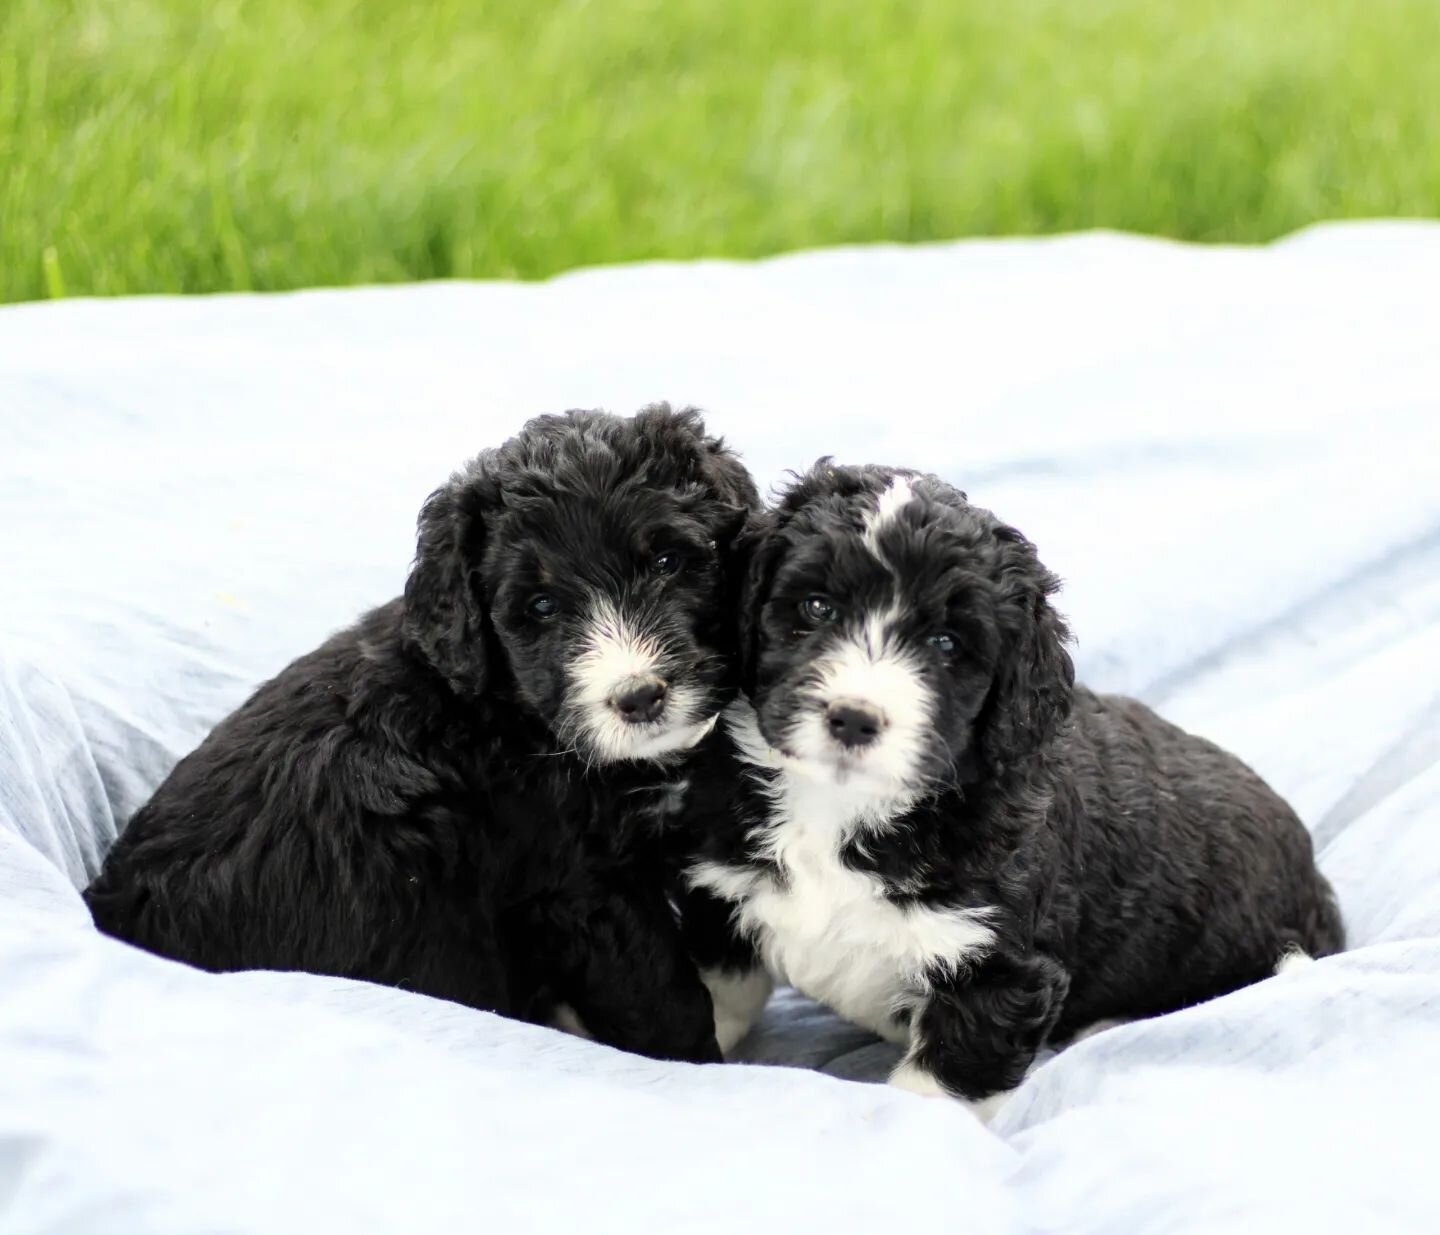 Excuse us, we were in the middle of cuddling 🥰

#haystackmountain #haystackbernedoodles  #bernedoodle #coloradobernedoodle #bernedoodlesofinstagram  #doodlesofinstagram #doodlesoftheworld #dogsofinstagram #puppiesofinstagram #puppy #tricolorbernedoo